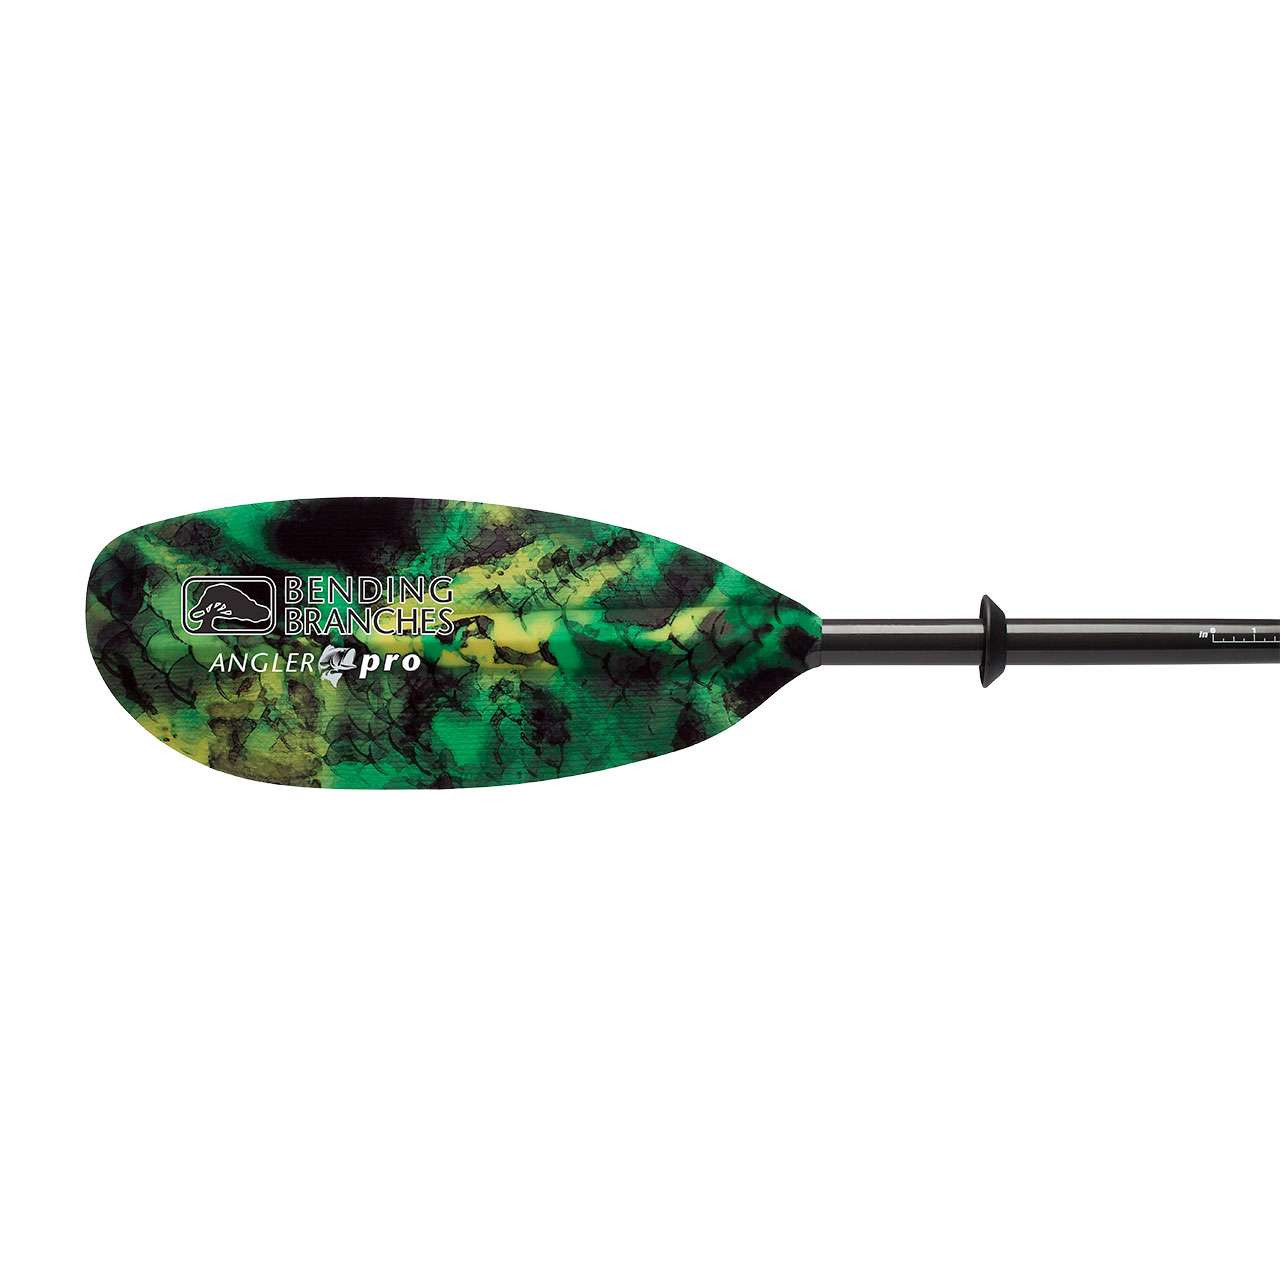 https://cdn11.bigcommerce.com/s-ui1qgsctvc/images/stencil/1280x1280/products/154/4112/Bending-Branches-Angler-Pro-Snap-Button-2-Piece-Kayak-Paddle_2296__05678.1706763654.jpg?c=2